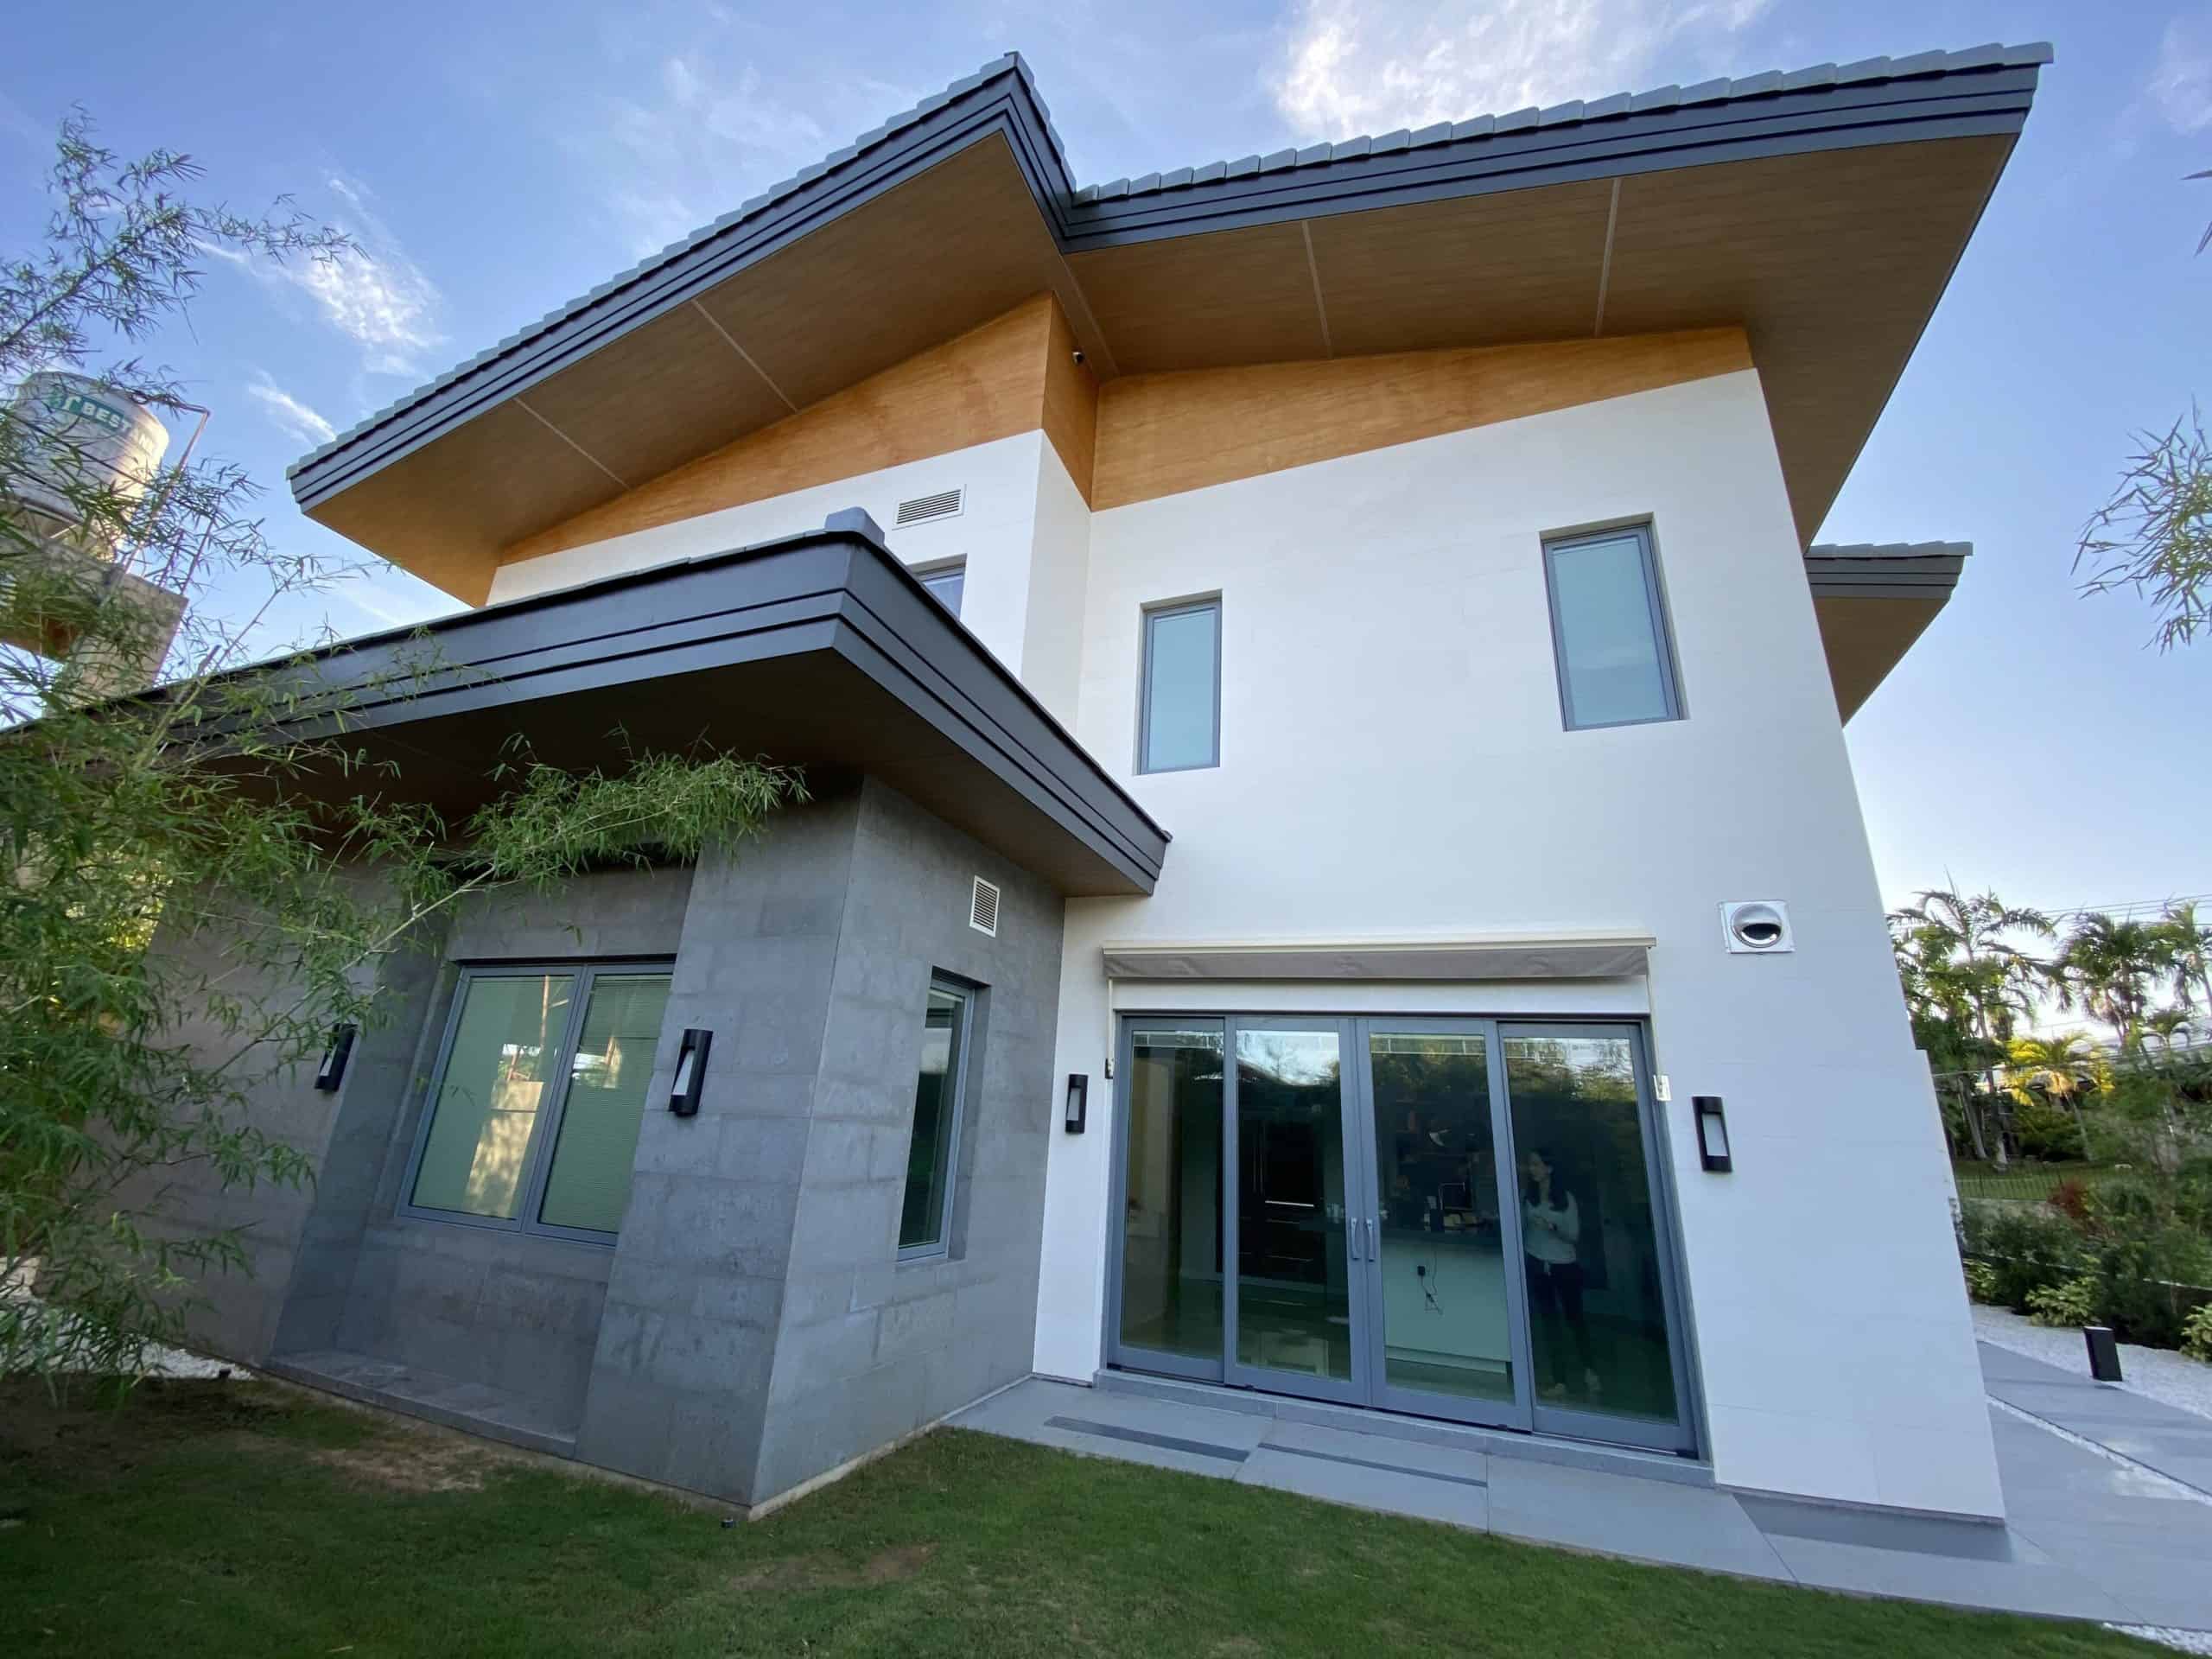 LEED Platinum Certified_Yap Project_Cebu, Philippines_Back Facing Home View